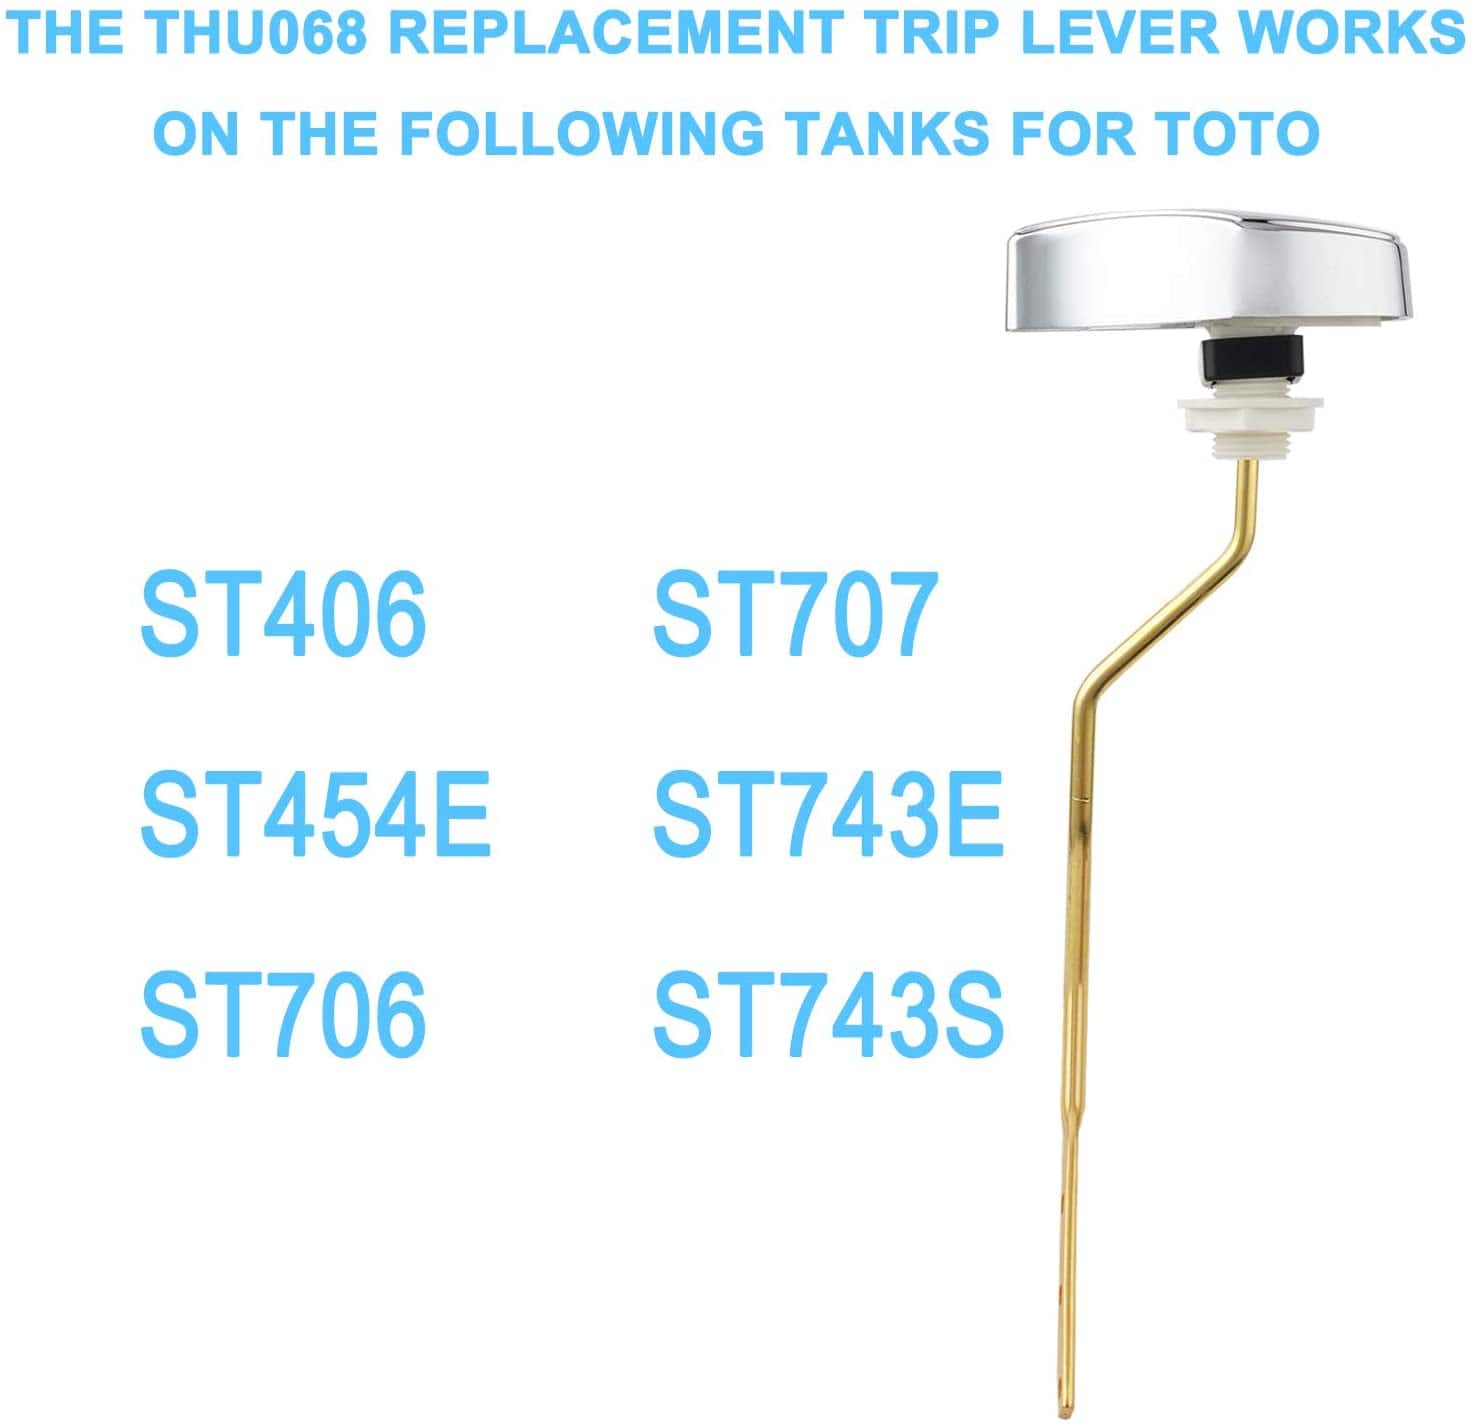 TOTO THU068#12 Trip Lever For St743S, Sedona Beige11.9 x 3 x 1.7 inches -  Toilet Tank Levers 